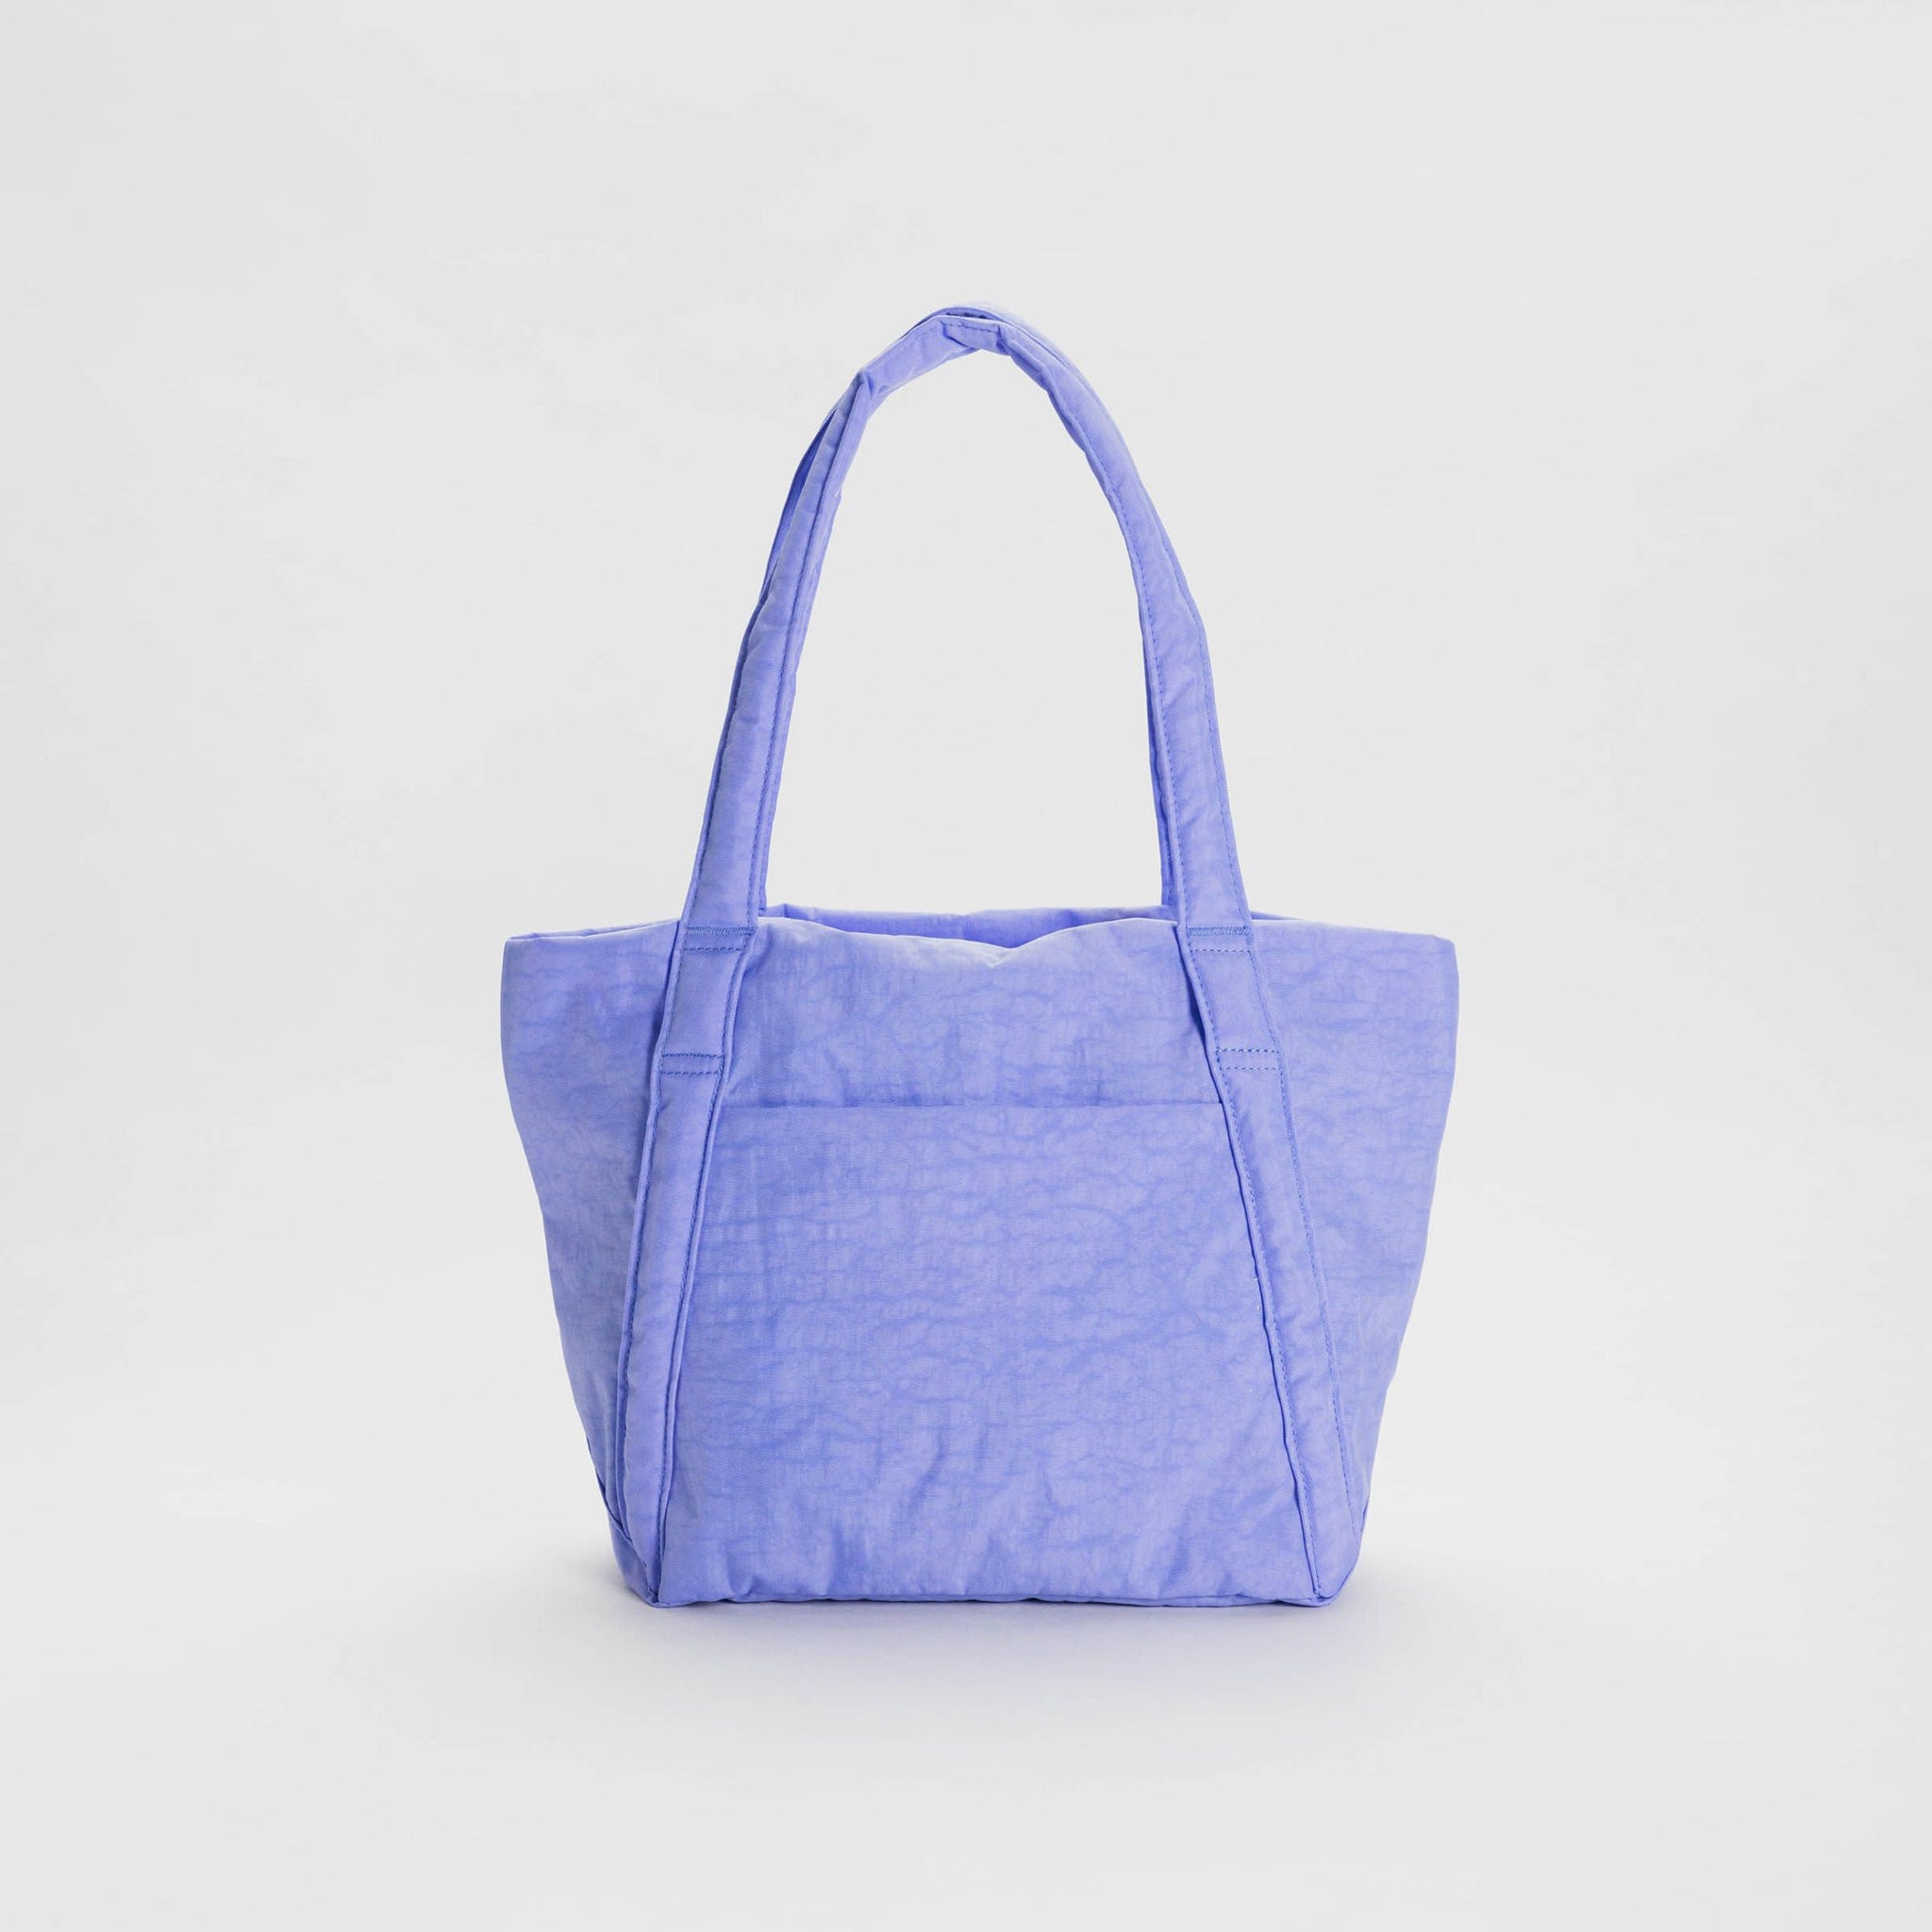 A periwinkle blue nylon shoulder tote with a puffy trapezoidal shape, shown standing up.